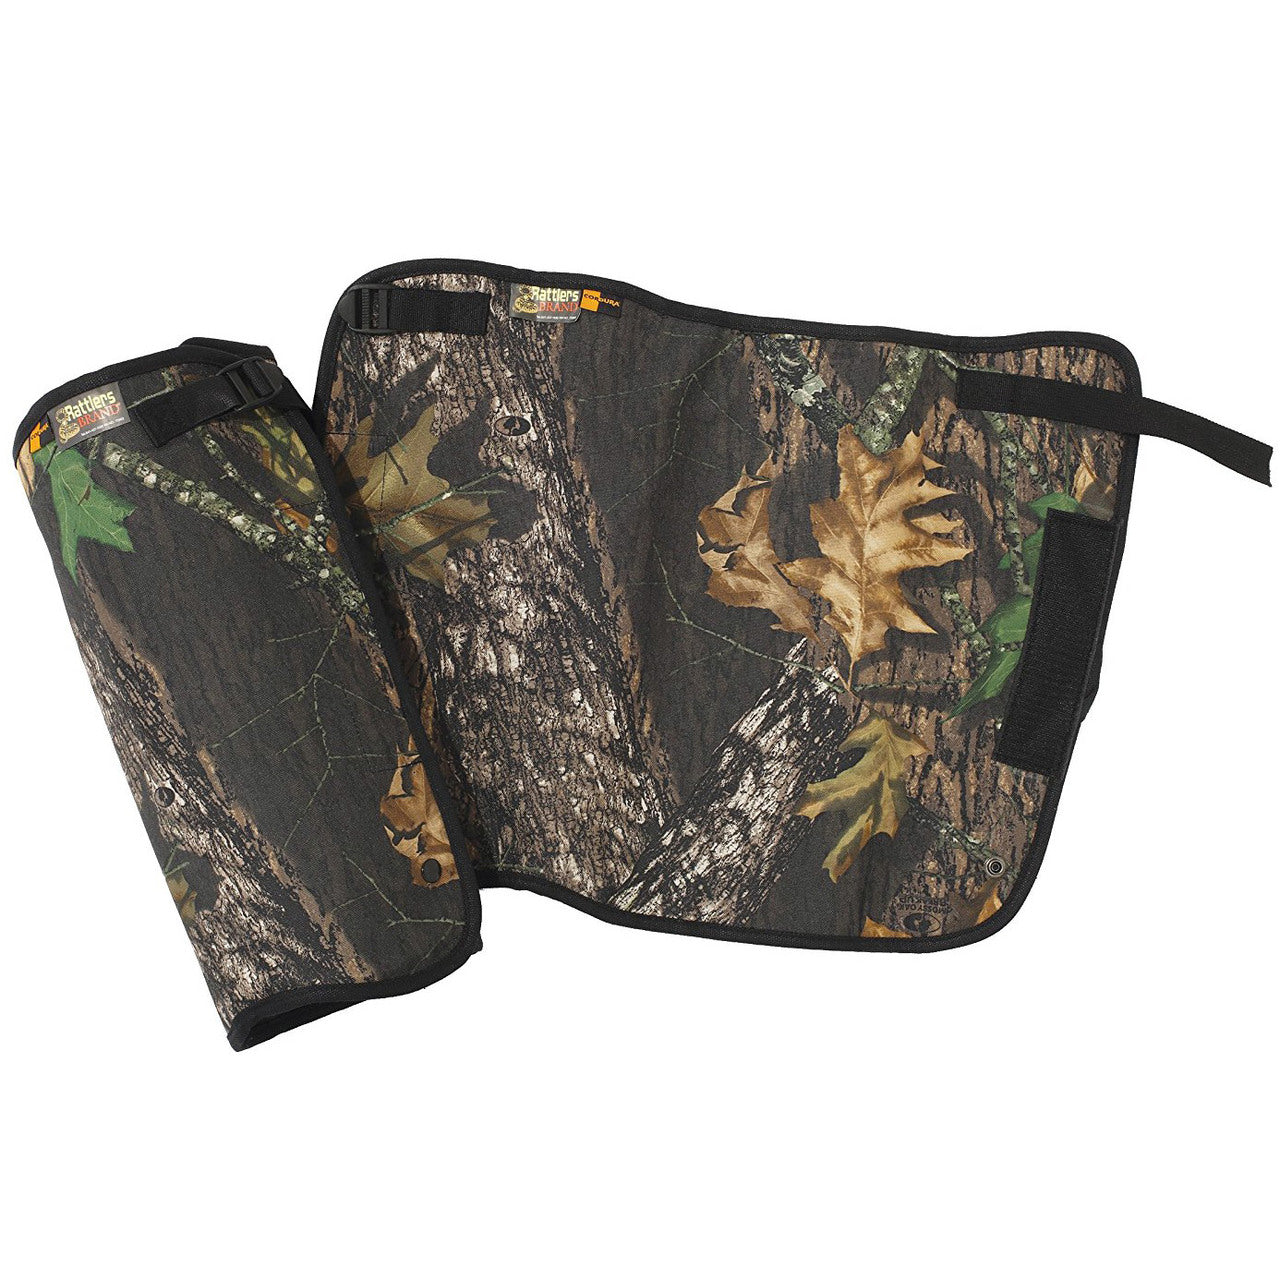 Rattlers Brand Snake Proof Gaiters